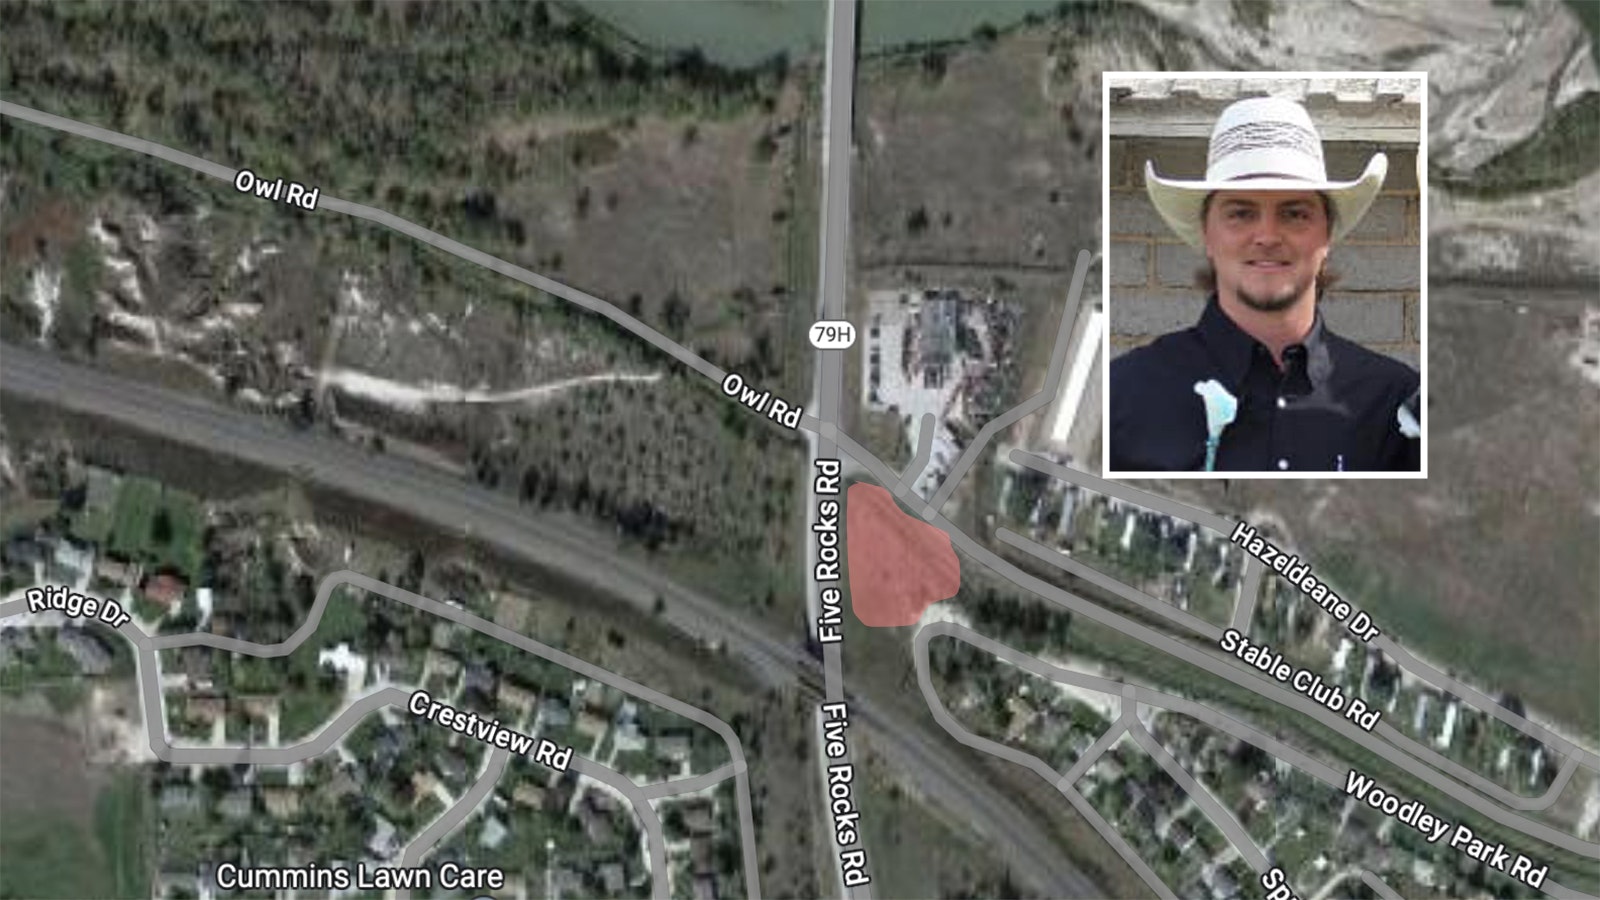 Chance Englebert was last seen on video in the highlighted area five years ago.